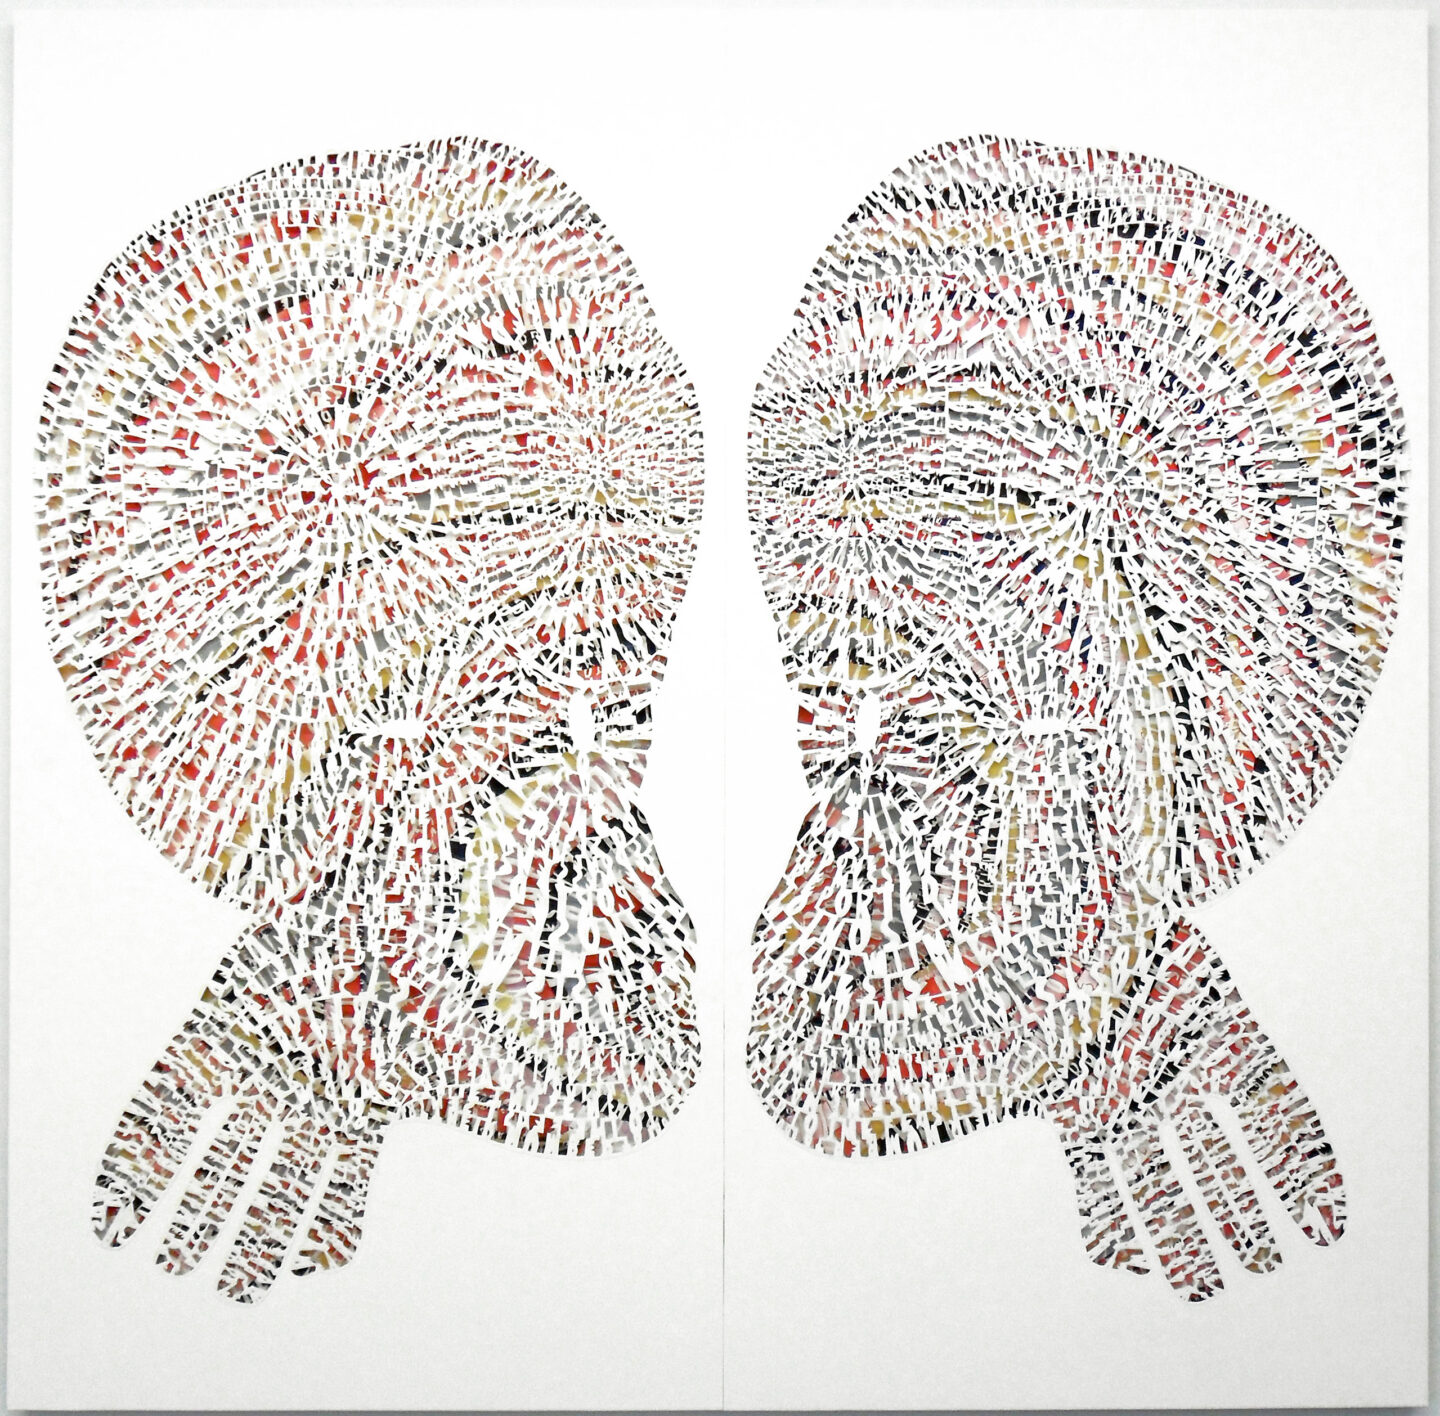 Two symmetrical forms that appear as heads with enlarged crania face each other. A colorful background for the heads peek through behind thousands of cut paper letters.